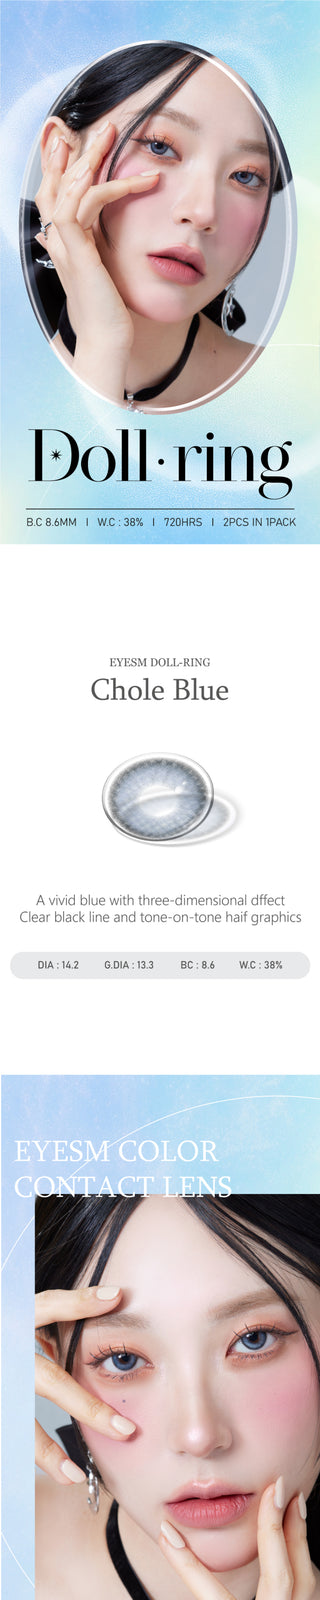 Several views of a Korean model with the Eyesm Dollring Chole Blue color contact lenses. An enlargement of a model's eyes with the prescription colored contacts, demonstrating the subtle yet striking change on dark eyes.